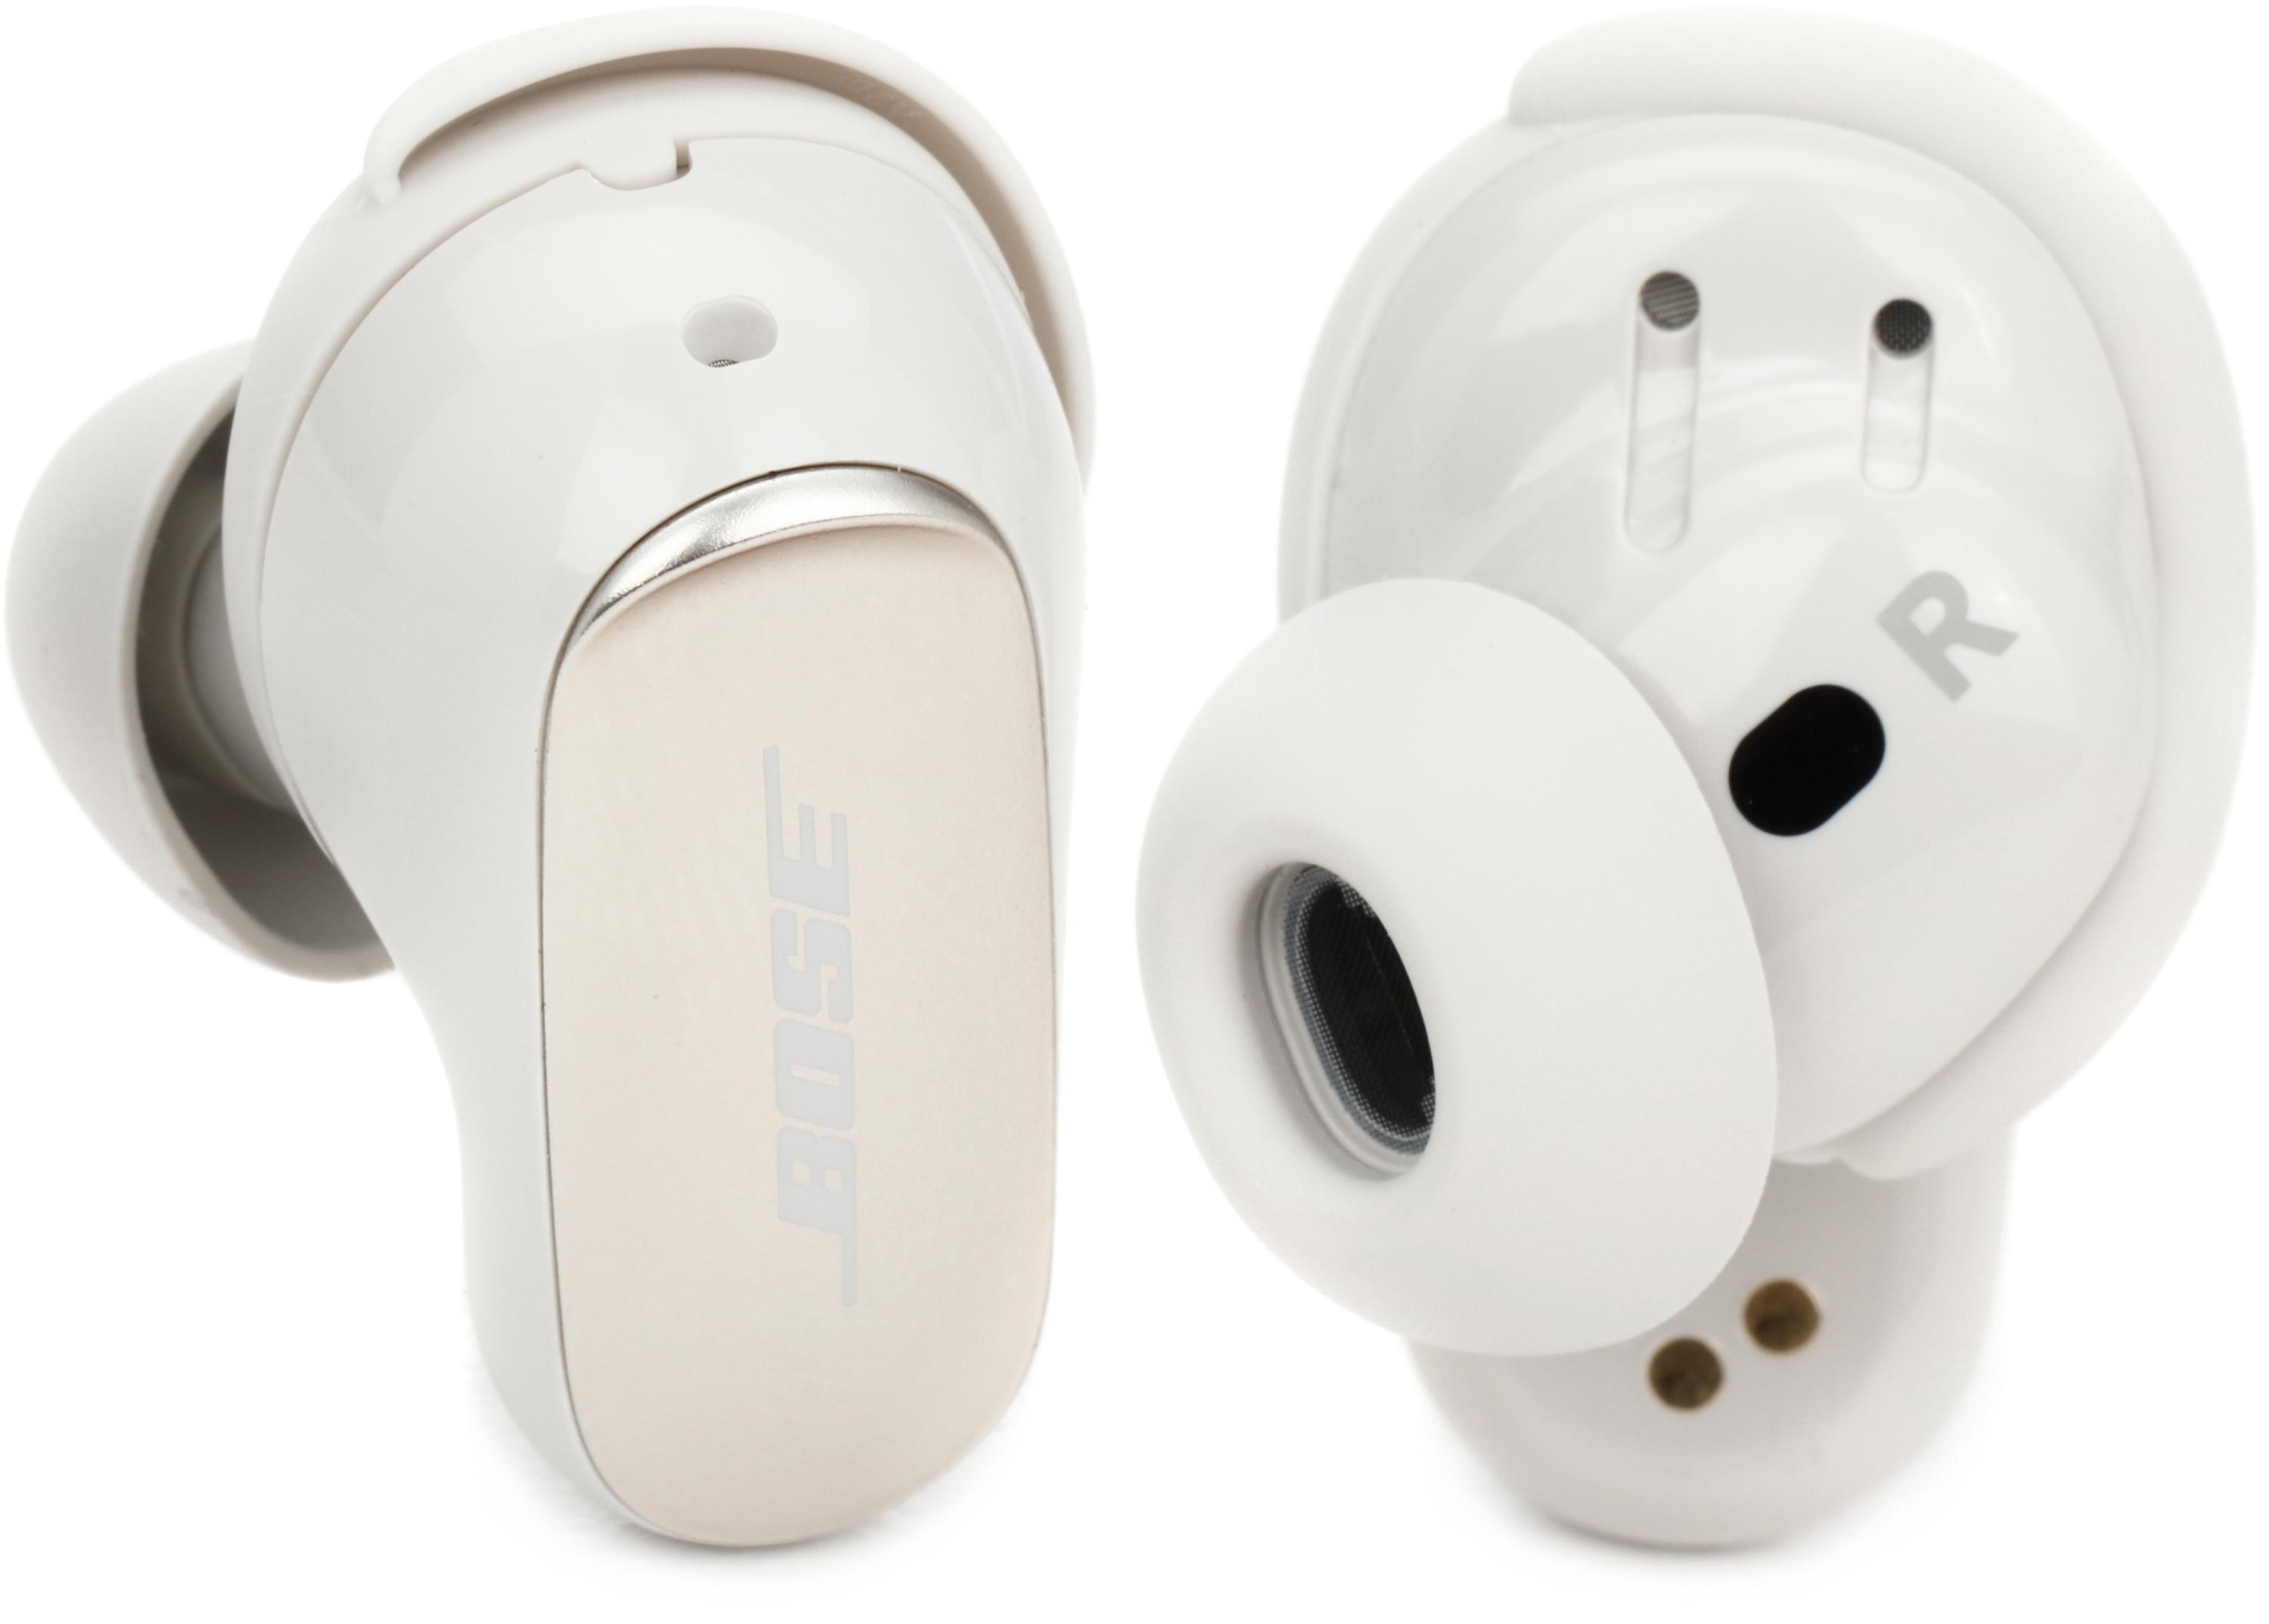 Bose QuietComfort Ultra Earbuds - White | Sweetwater